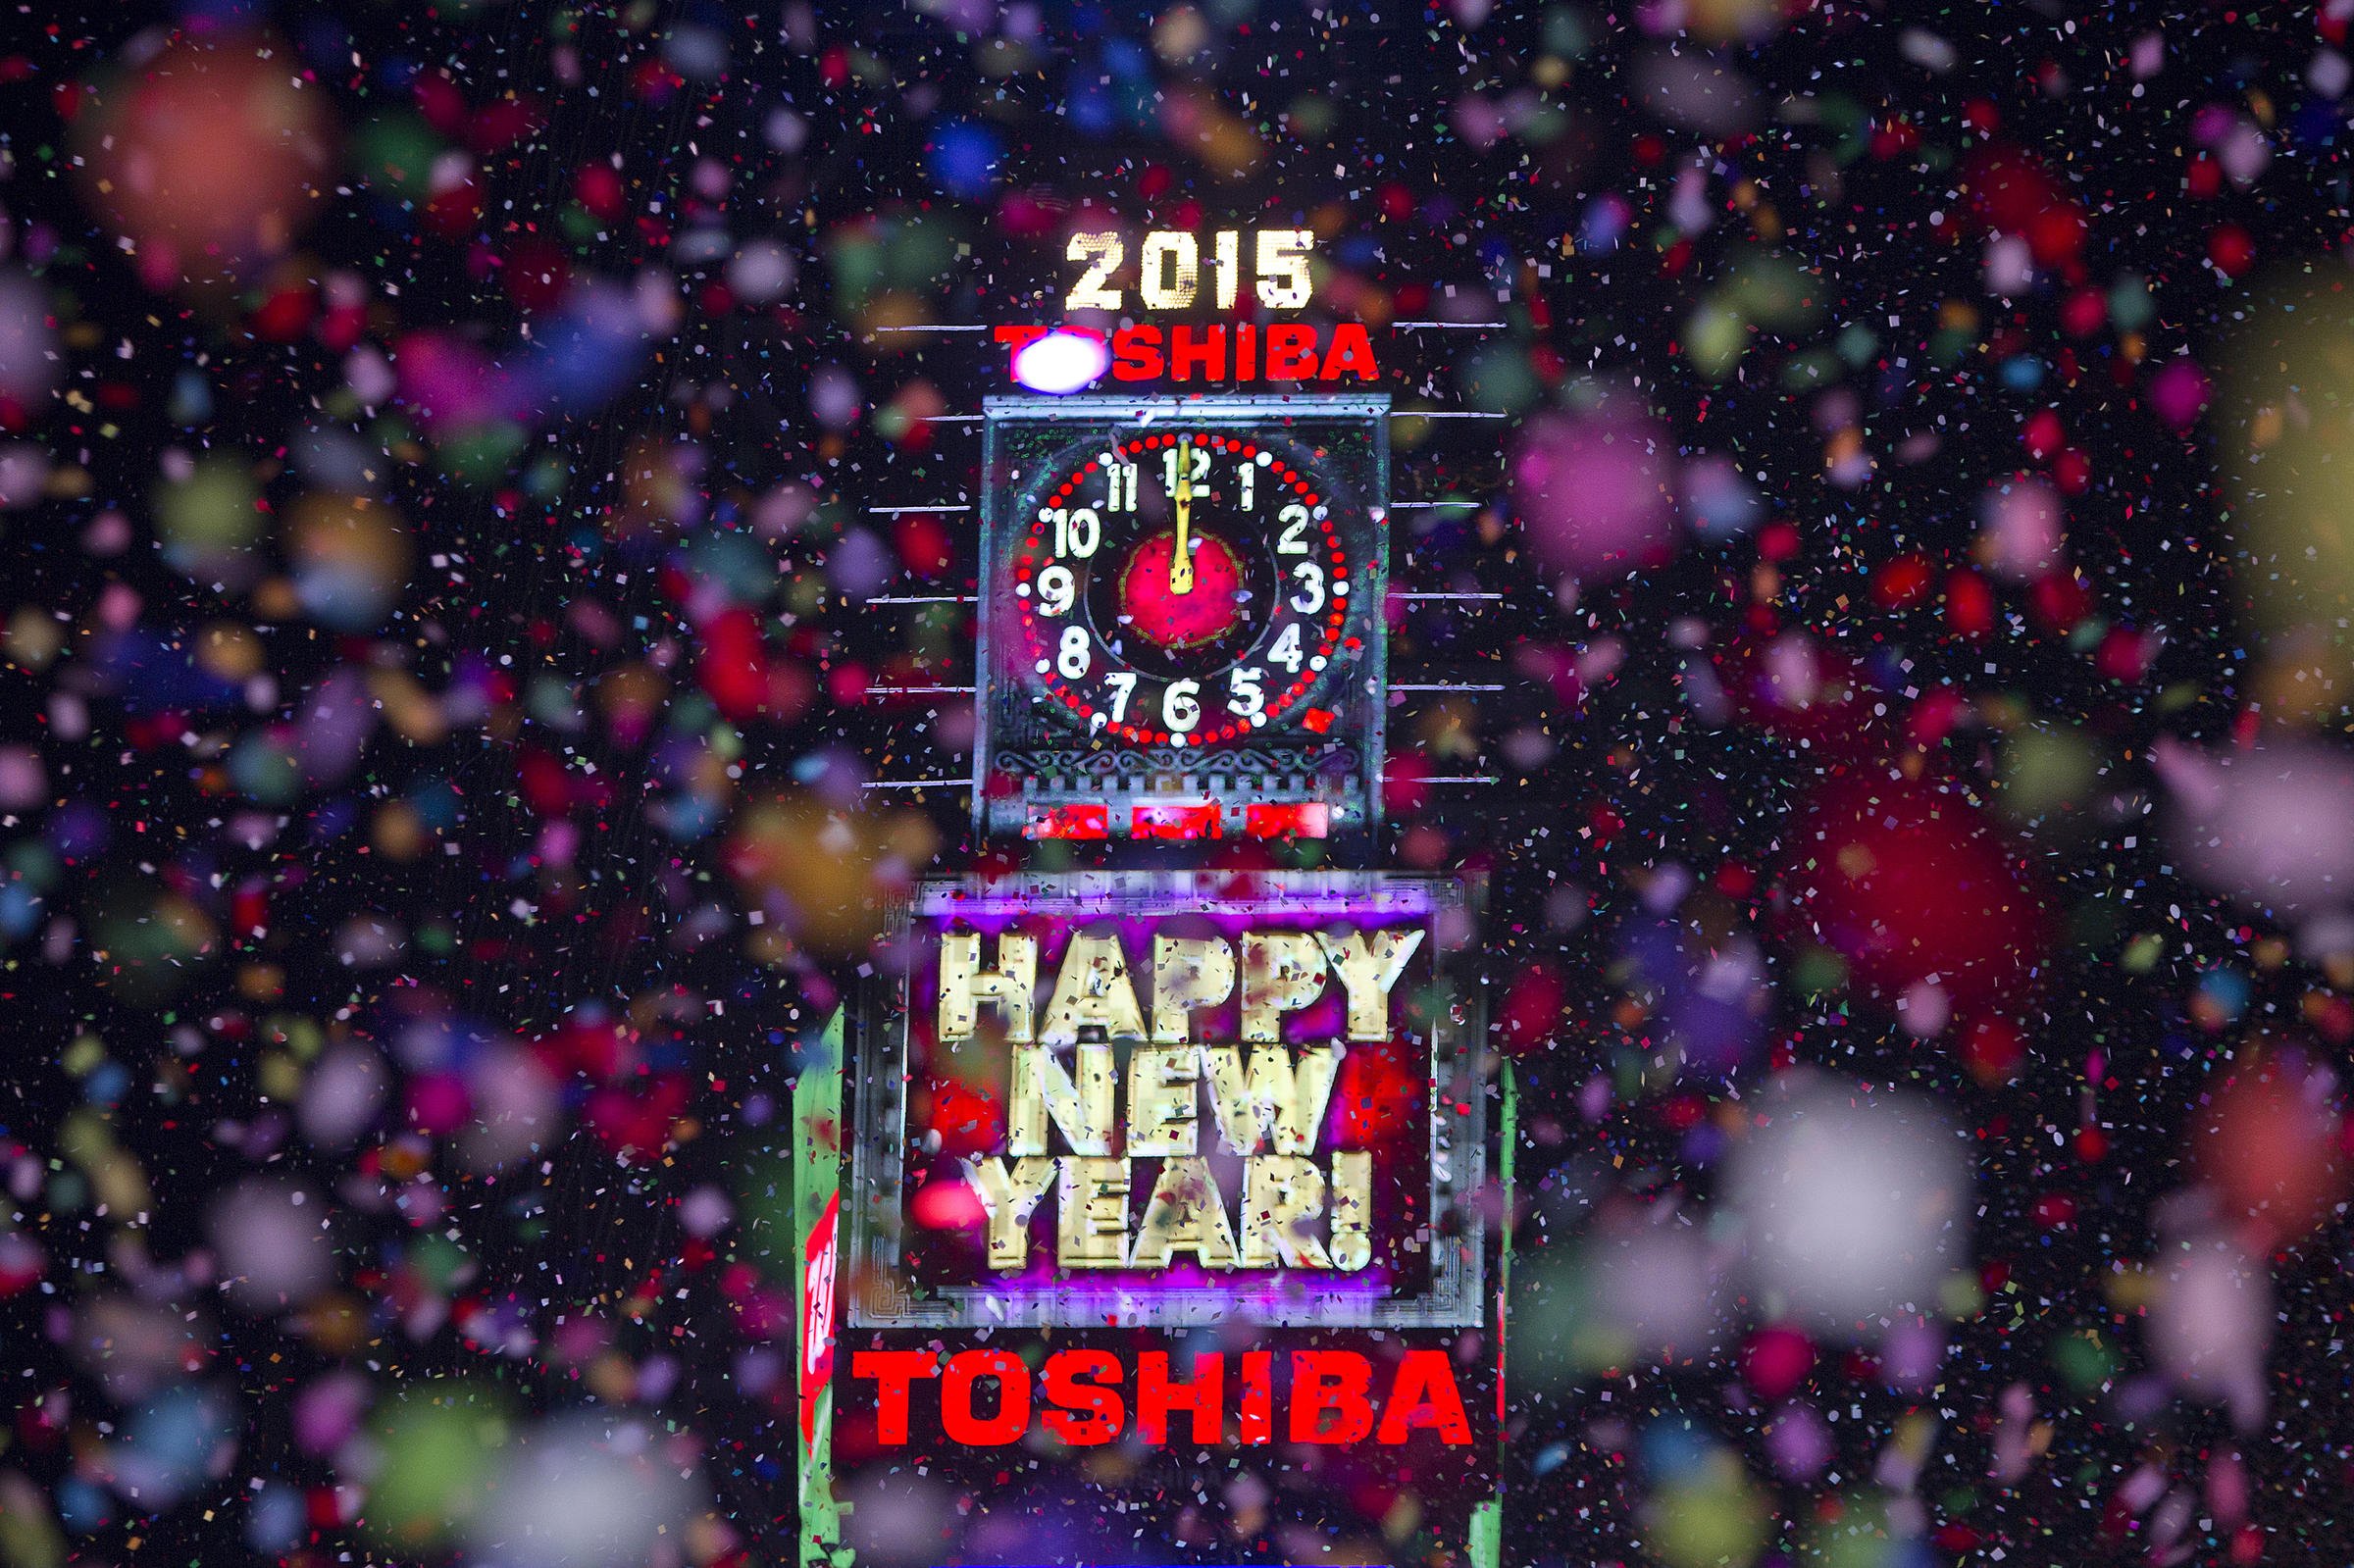 Confetti flies around the ball and countdown clock in Times Square on New Year's Eve in New York January 1, 2015. REUTERS/Carlo Allegri (UNITED STATES - Tags: SOCIETY ANNIVERSARY) - RTR4JSGR